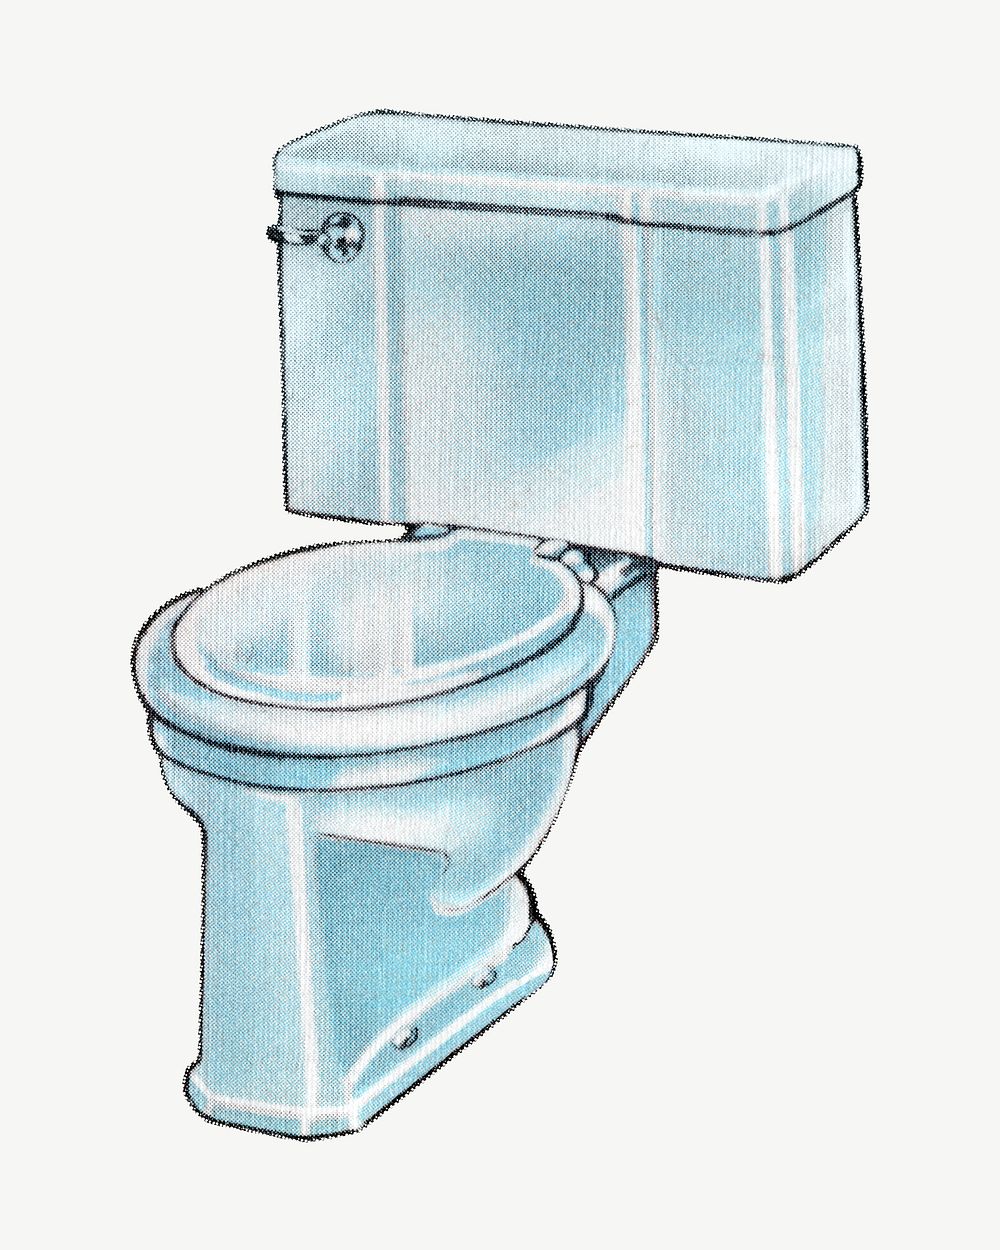 Vintage toilet chromolithograph illustration psd. Remixed by rawpixel.